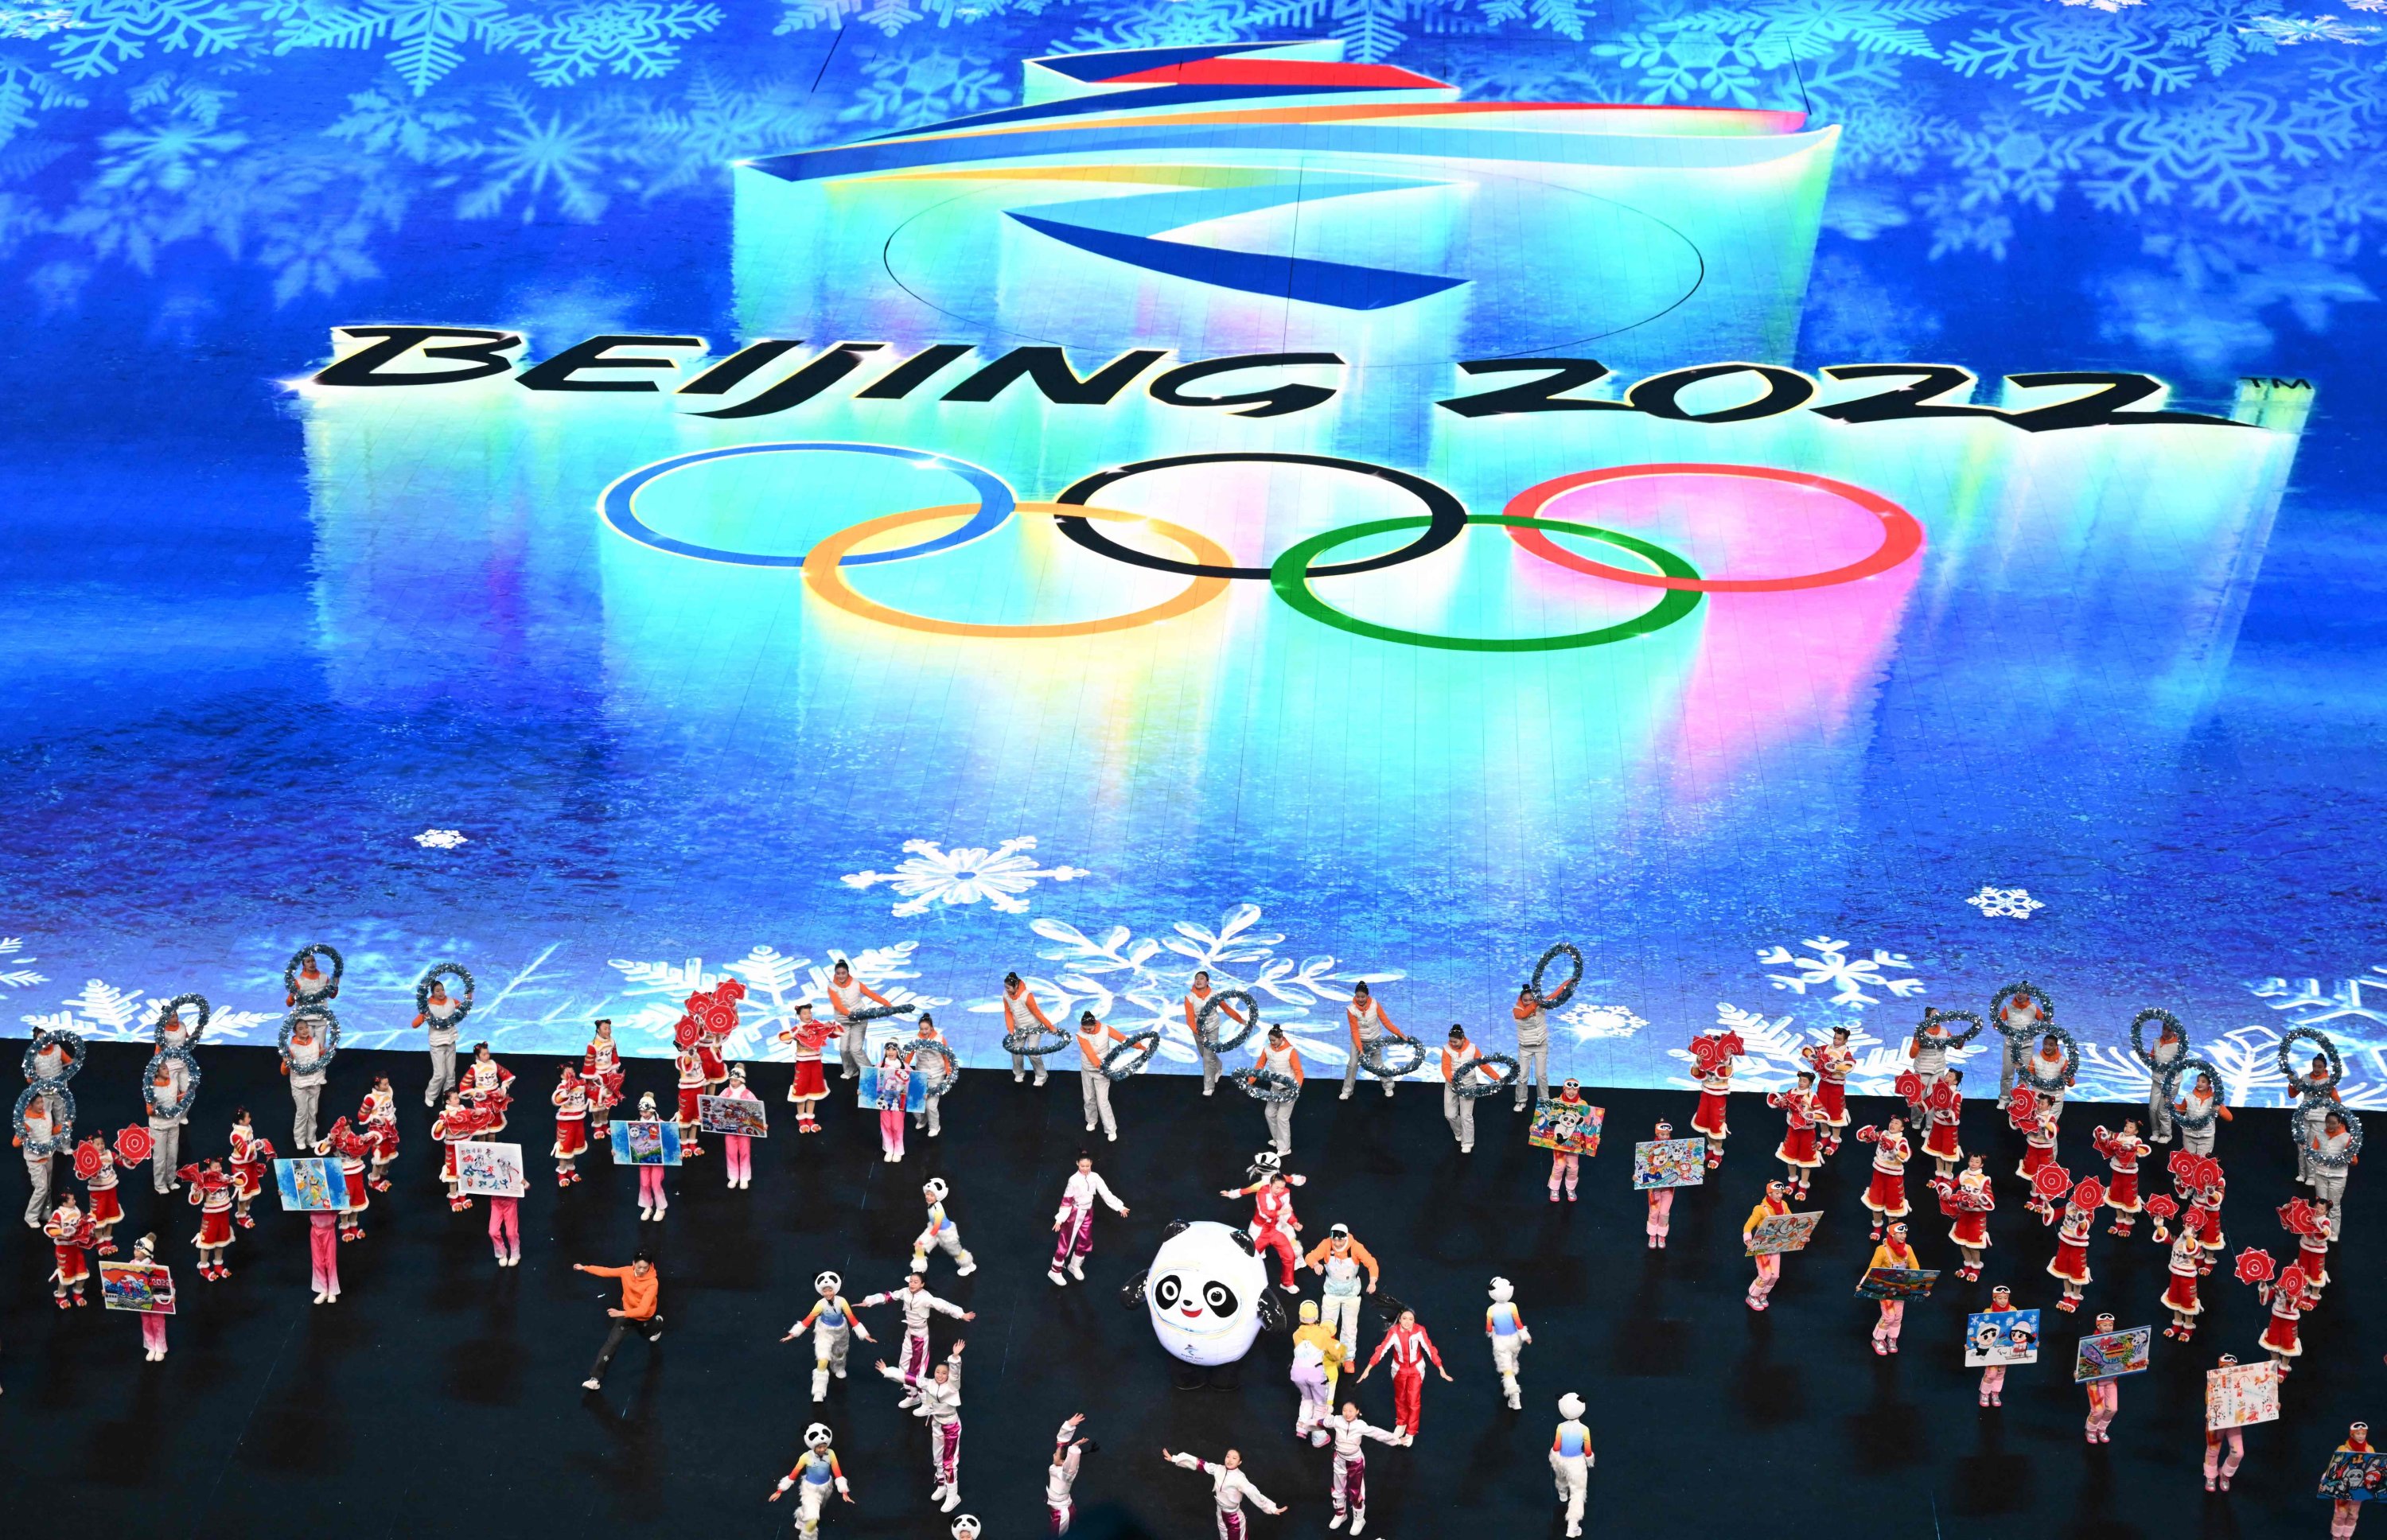 Performers dance during the Beijing 2022 Winter Olympic Games opening ceremony, Beijing, China, Feb. 4, 2022. (AFP Photo)